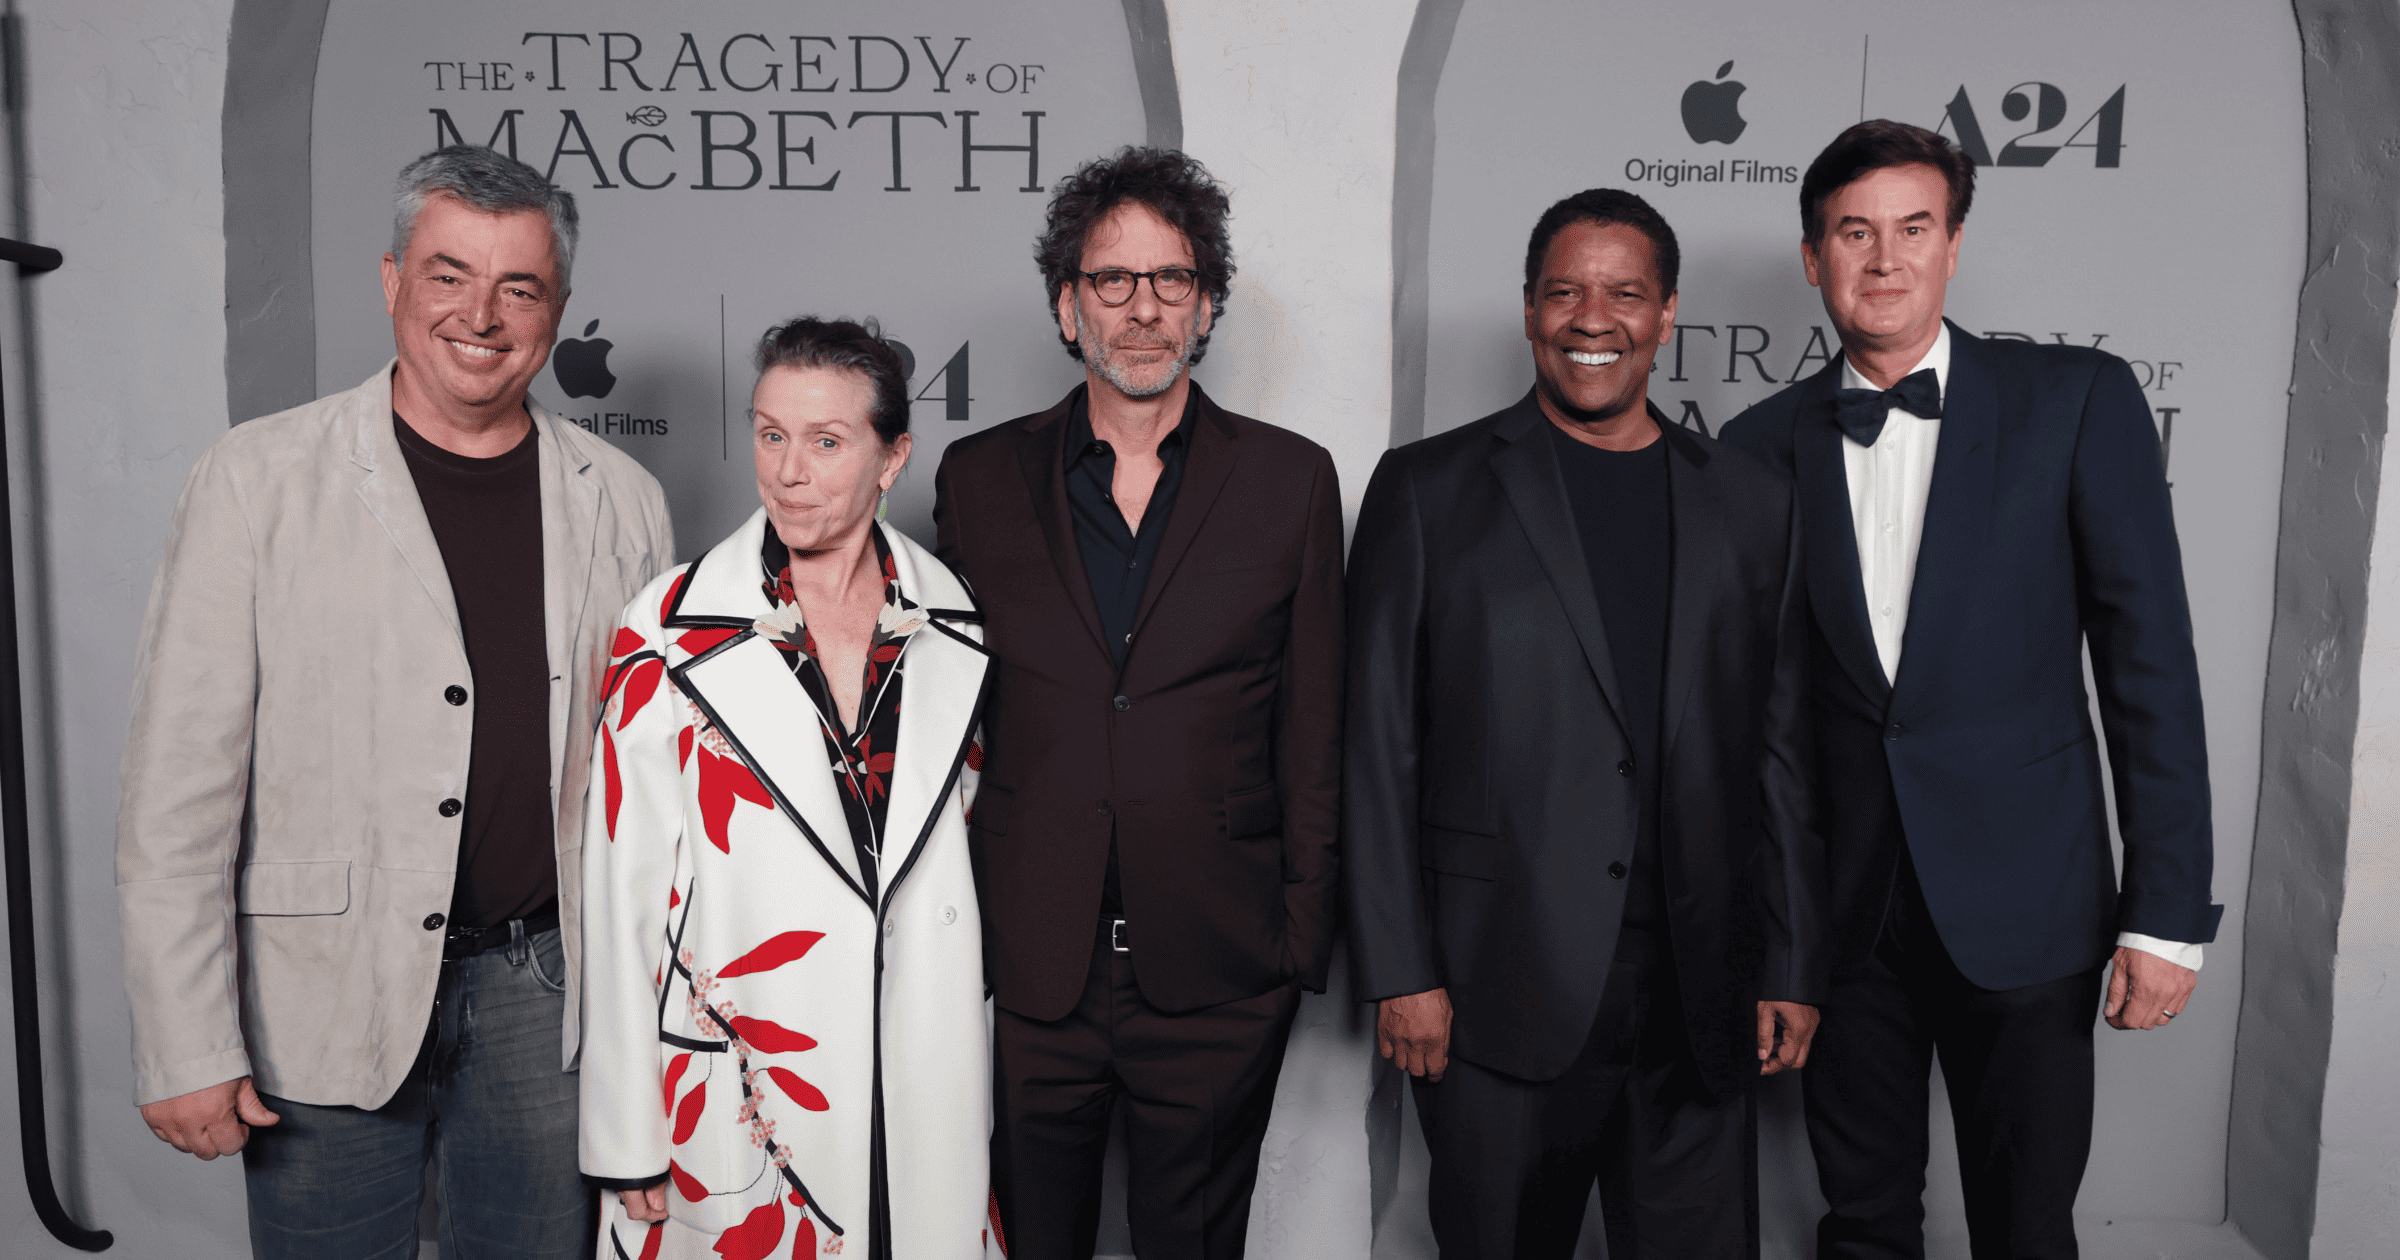 ‘The Tragedy of Macbeth’ Premiere Takes Place in Los Angeles